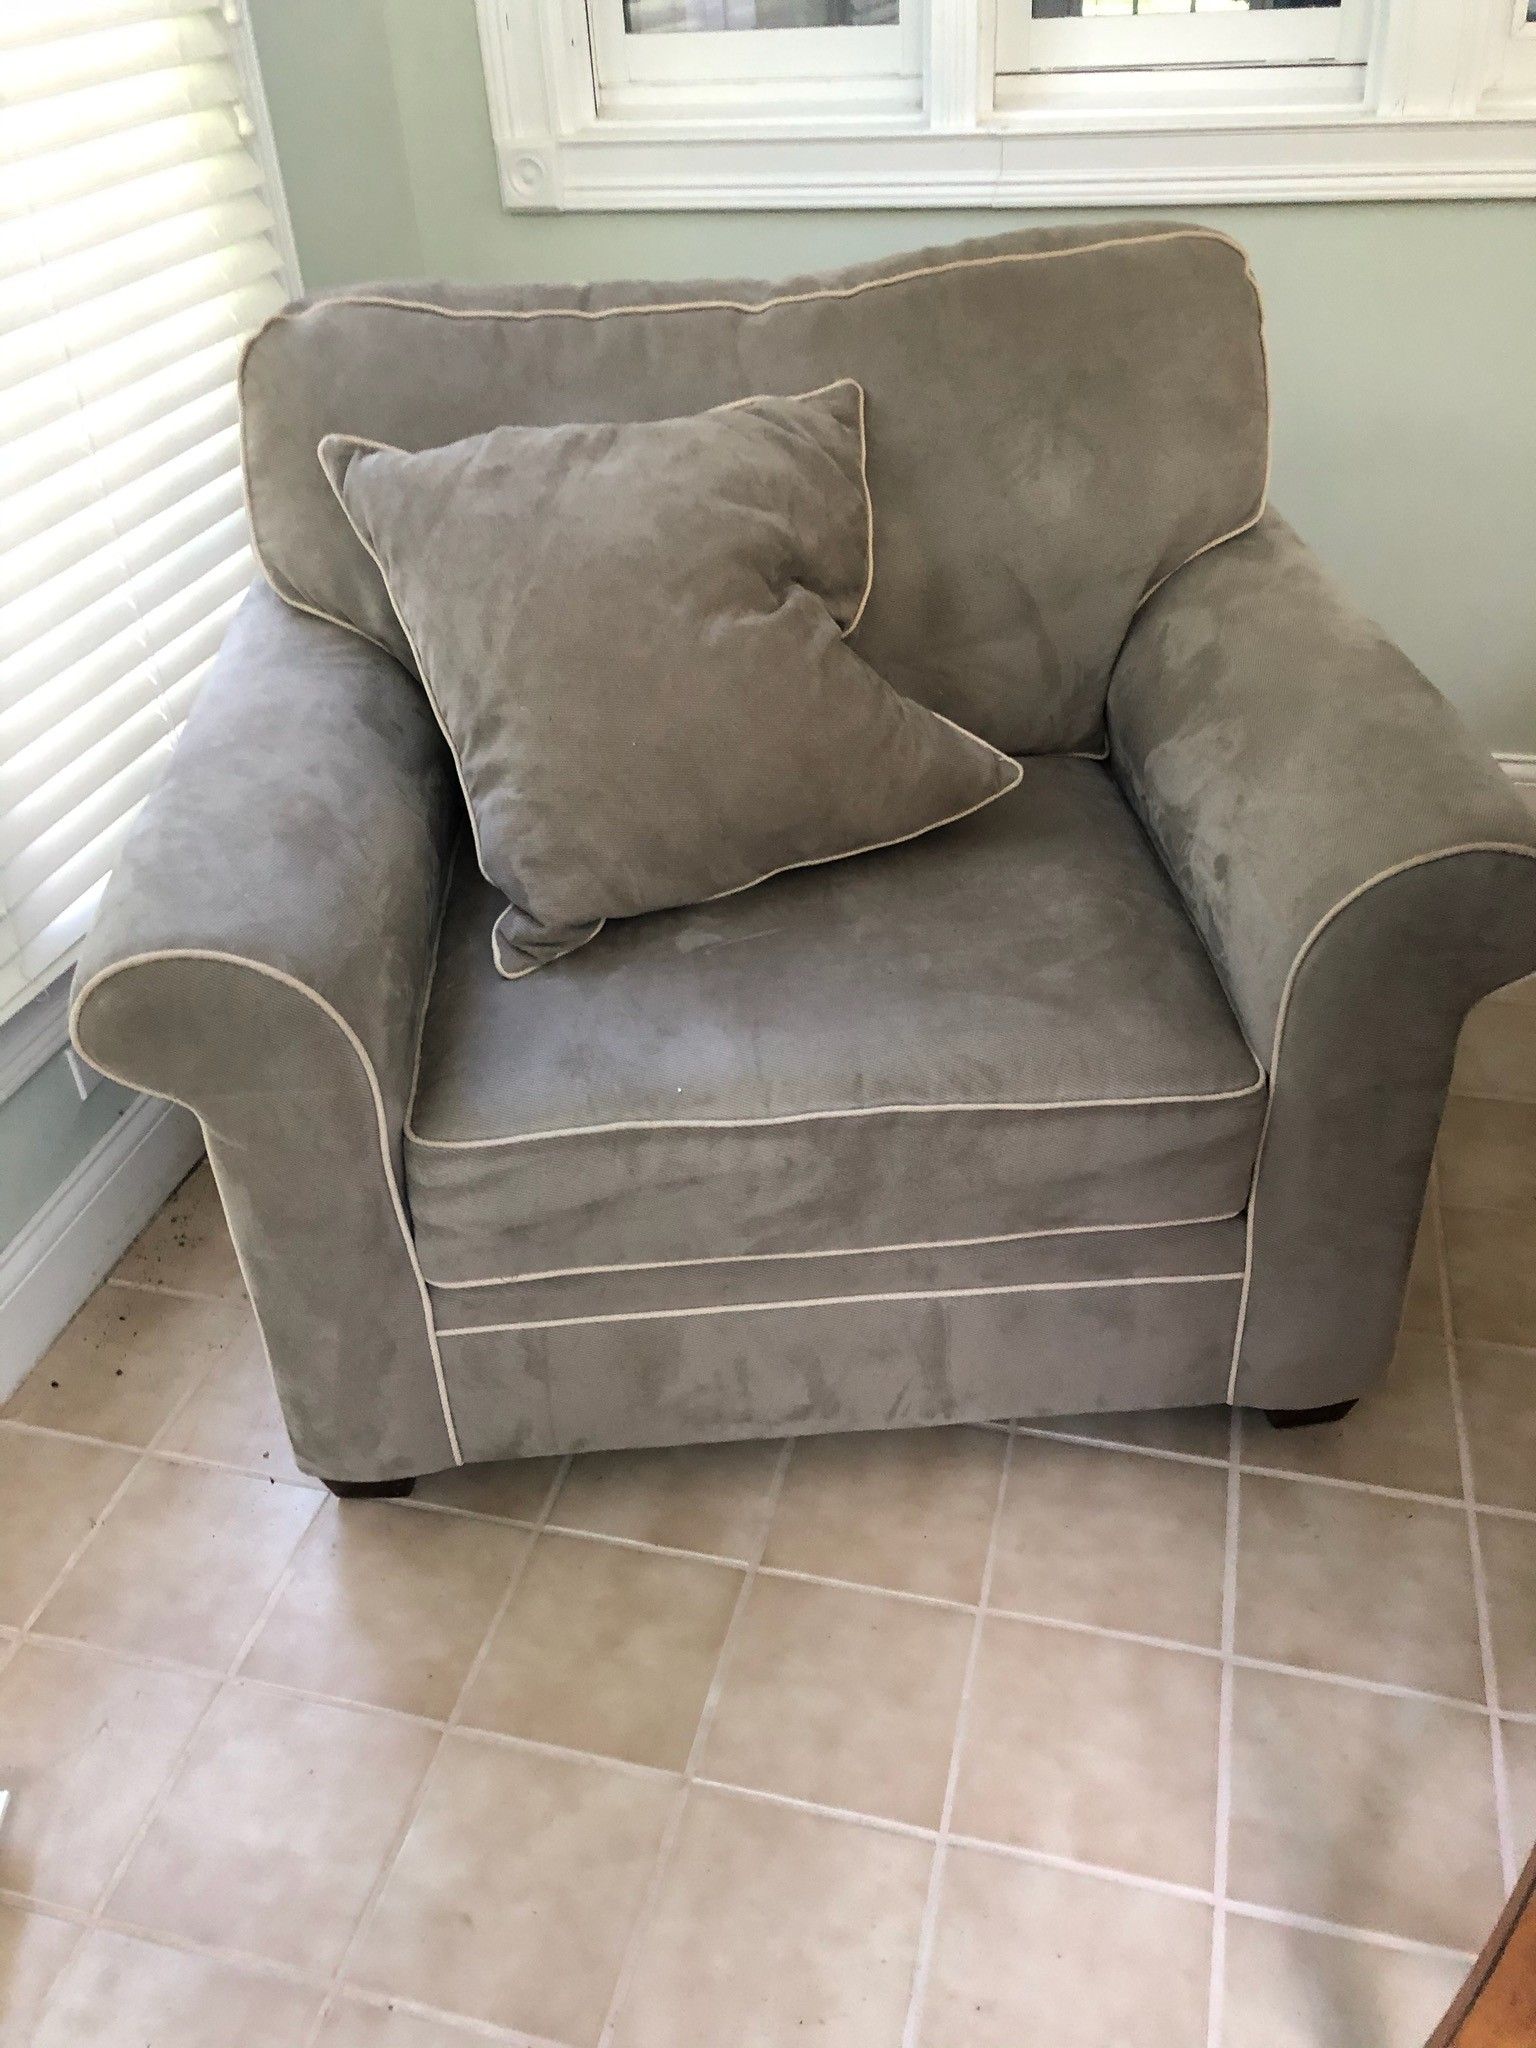 Chair with matching pillow